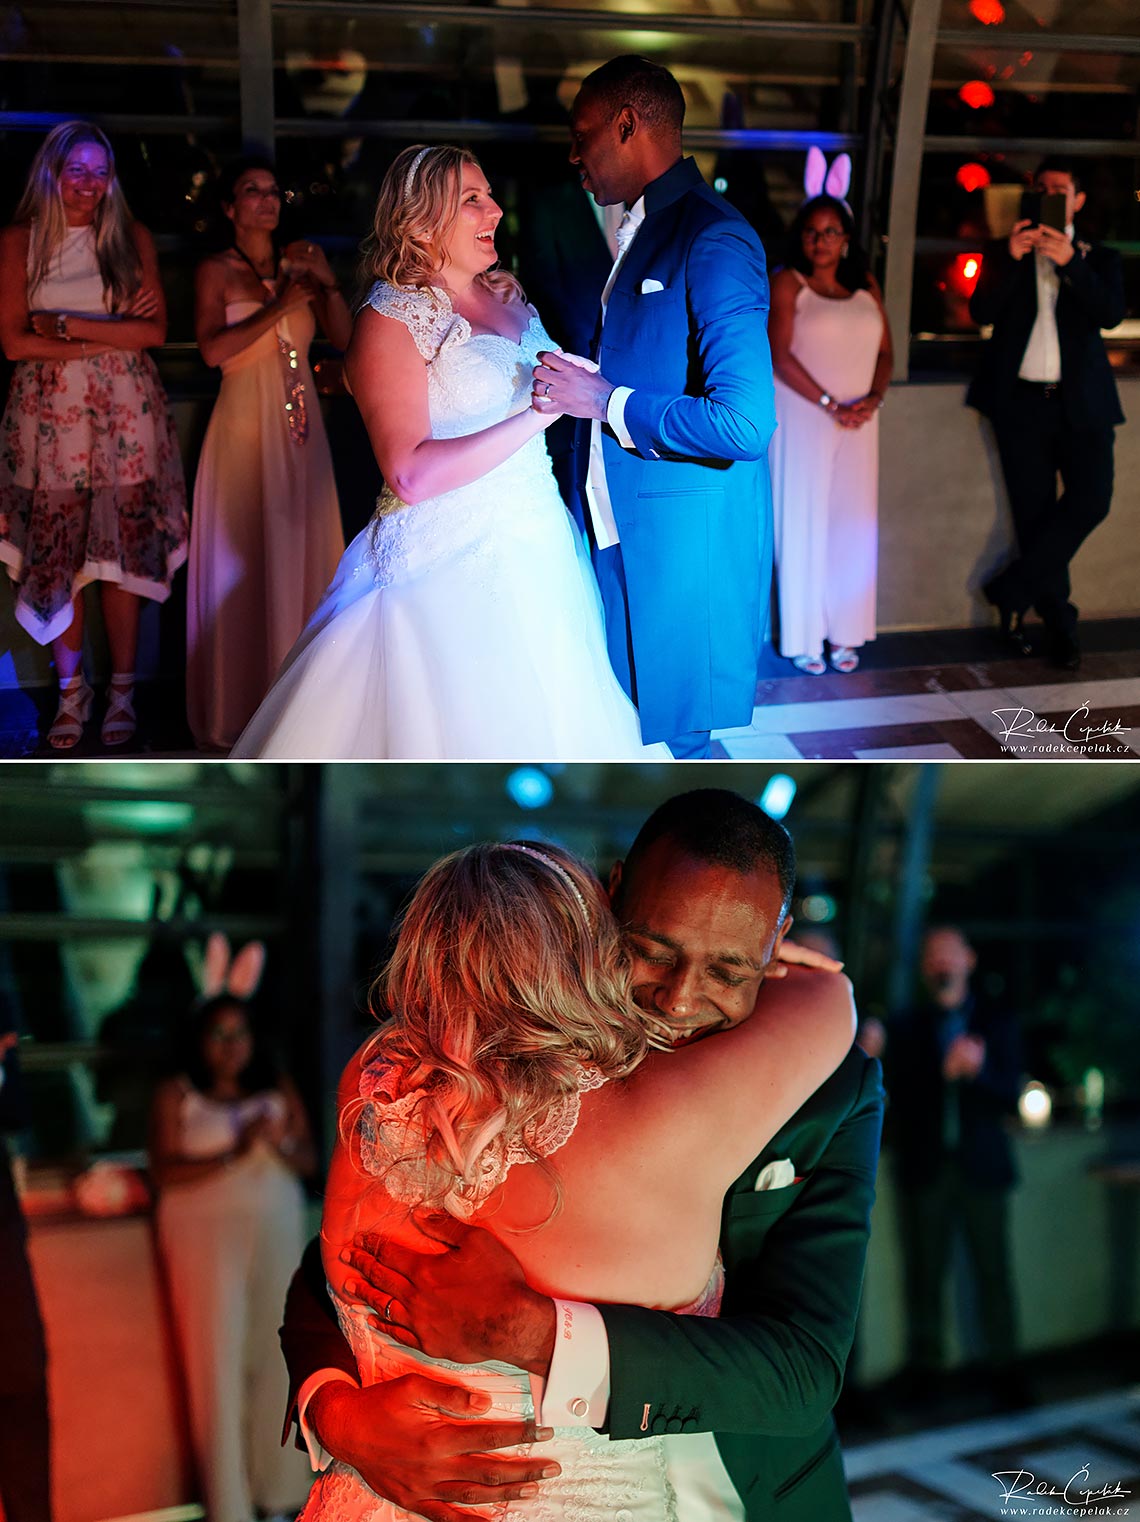 the first dance of bride and groom